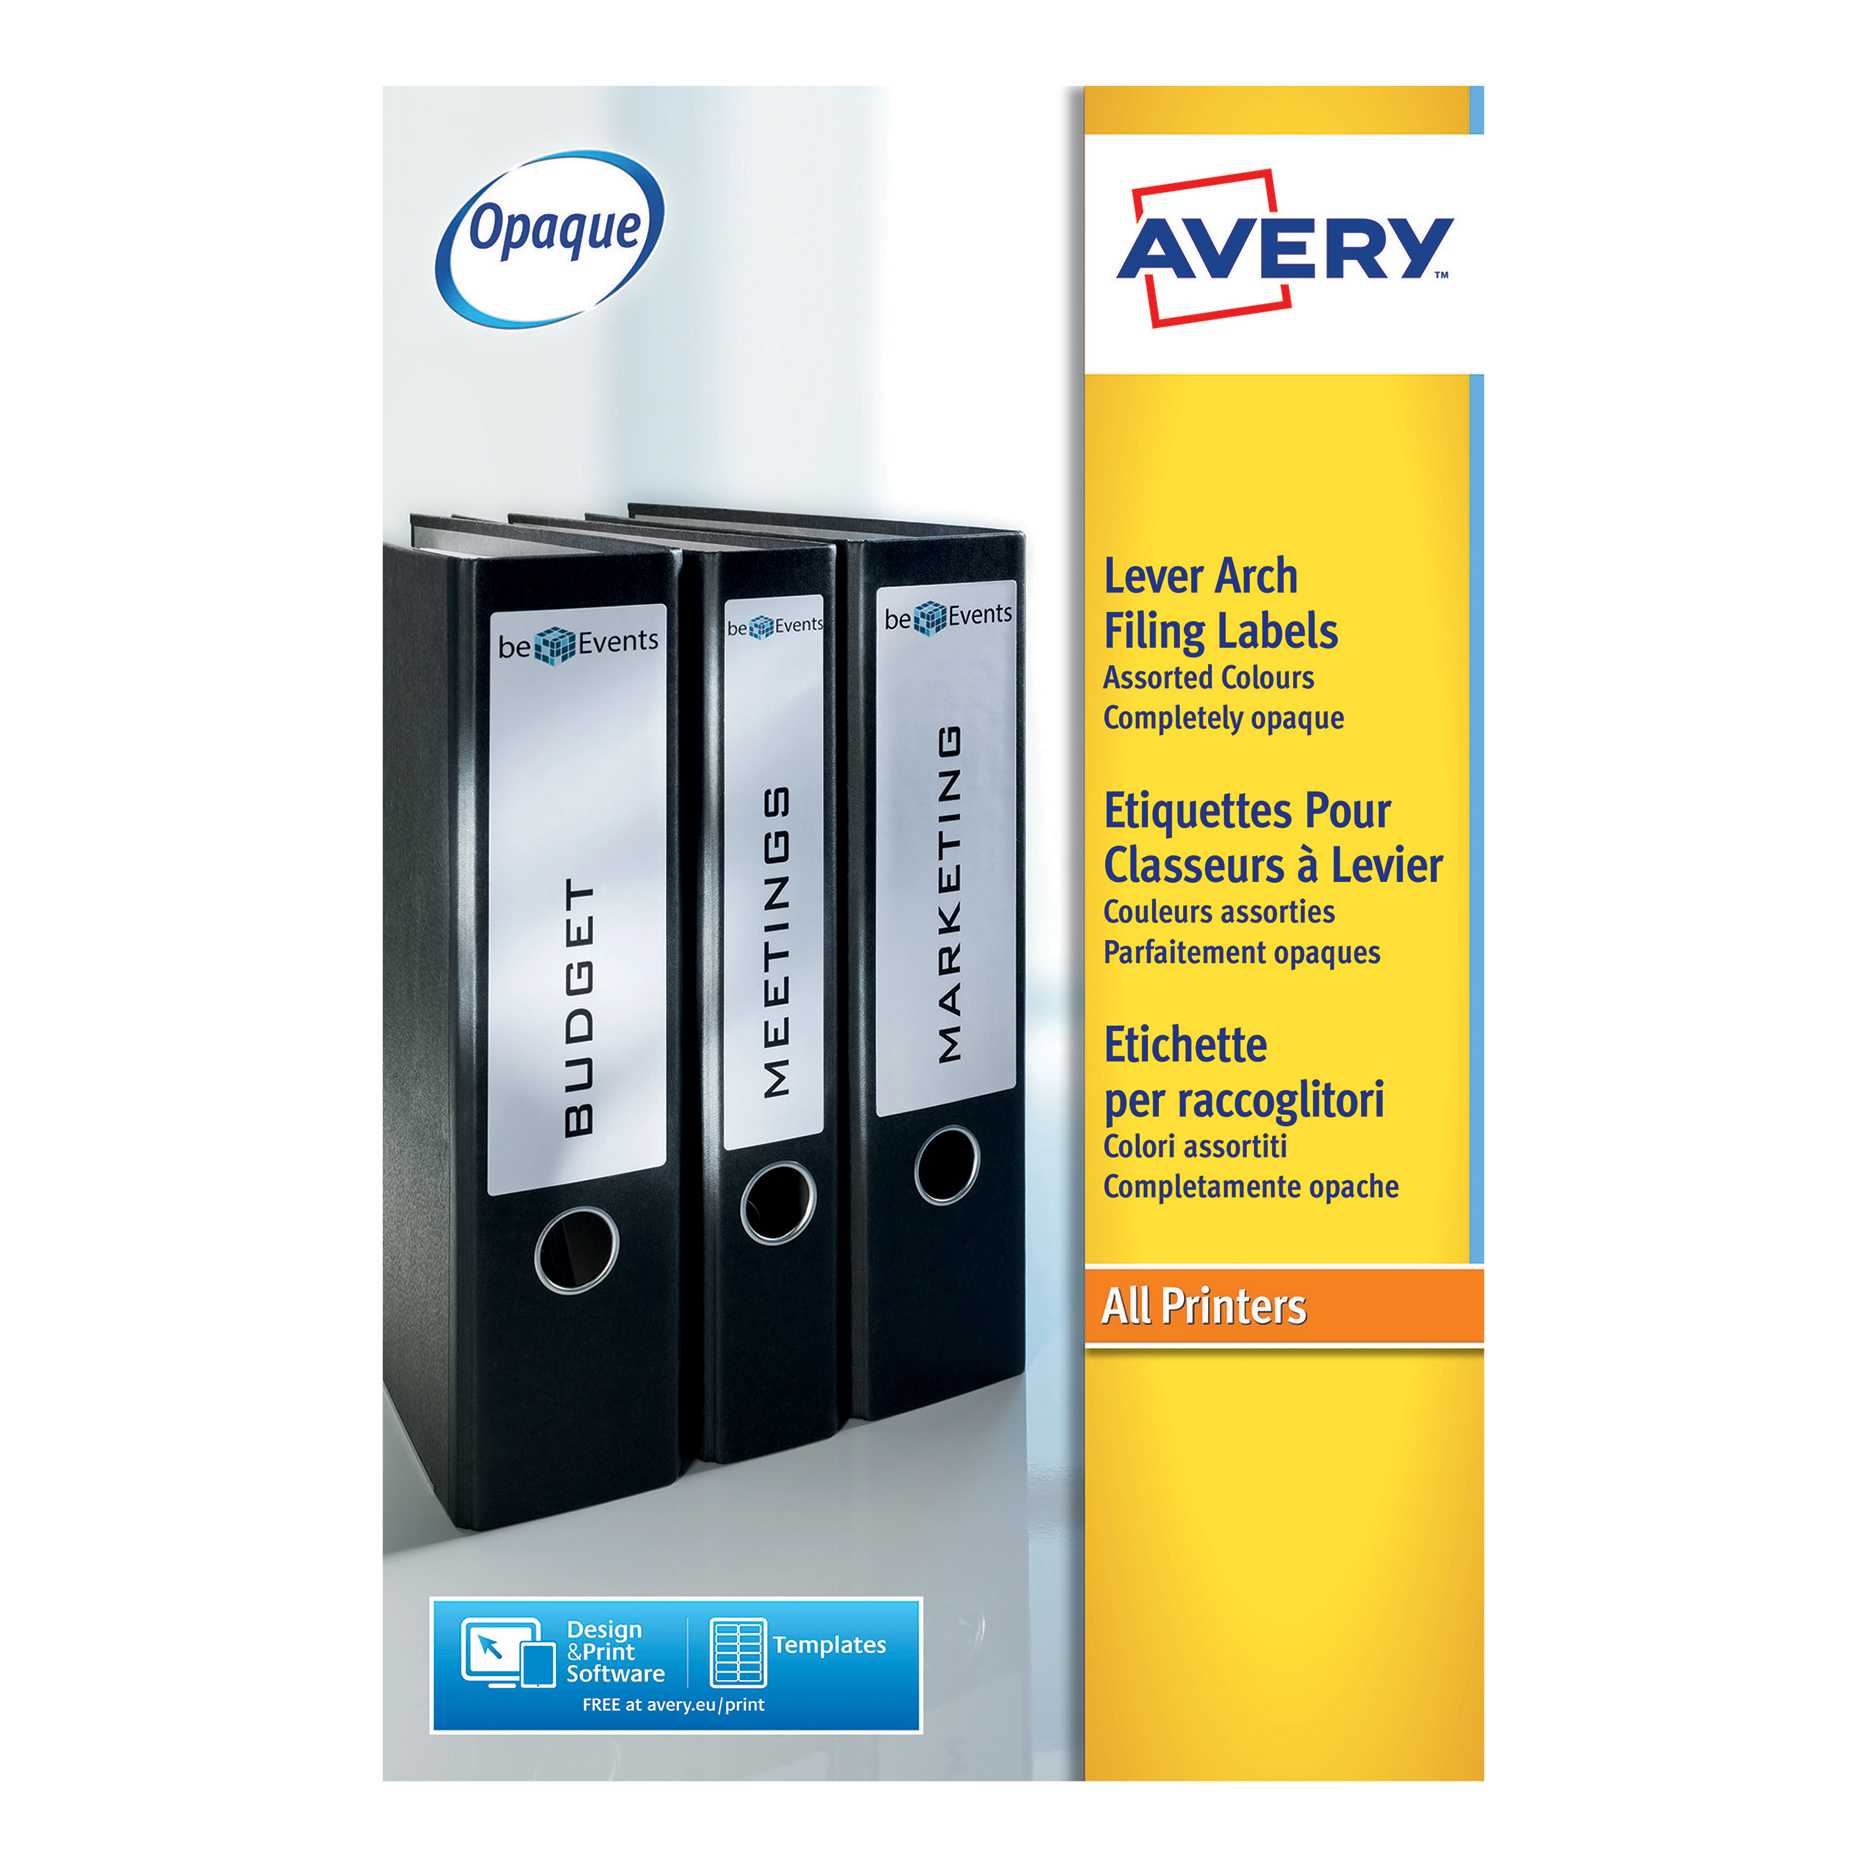 Avery Filing Labels Laser Lever Arch 4 Per Sheet 200X60Mm In Free Lever Arch File Spine Label Template